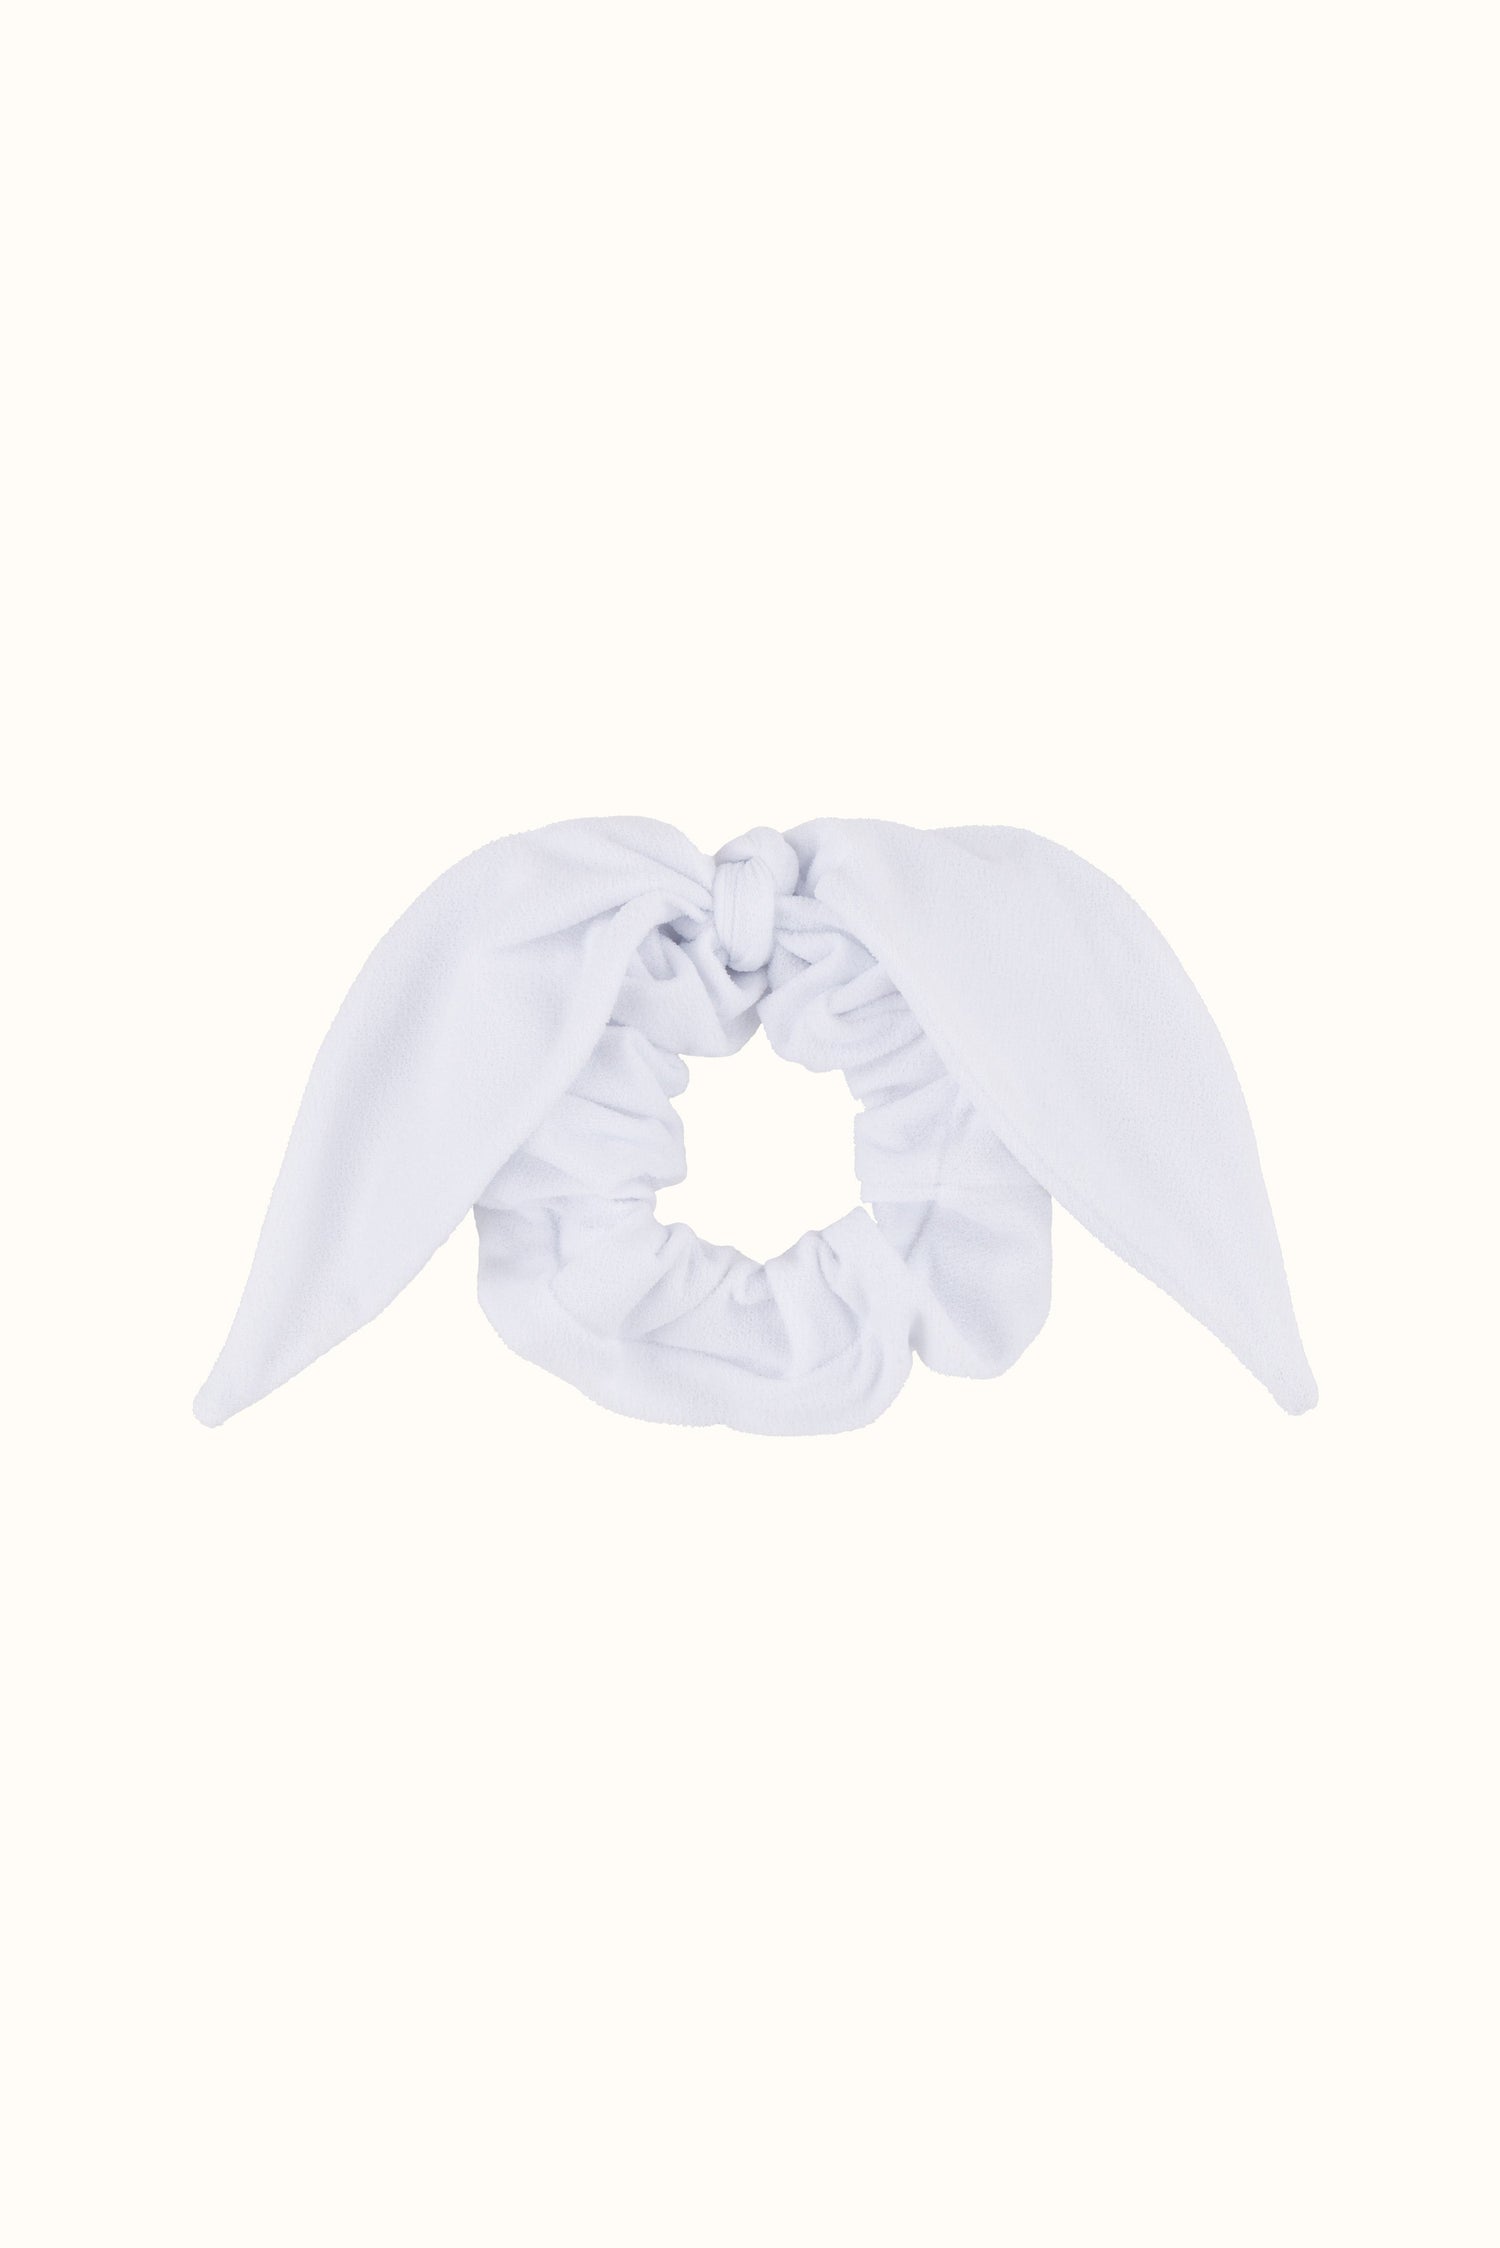 The White Terry Bow Scrunchie